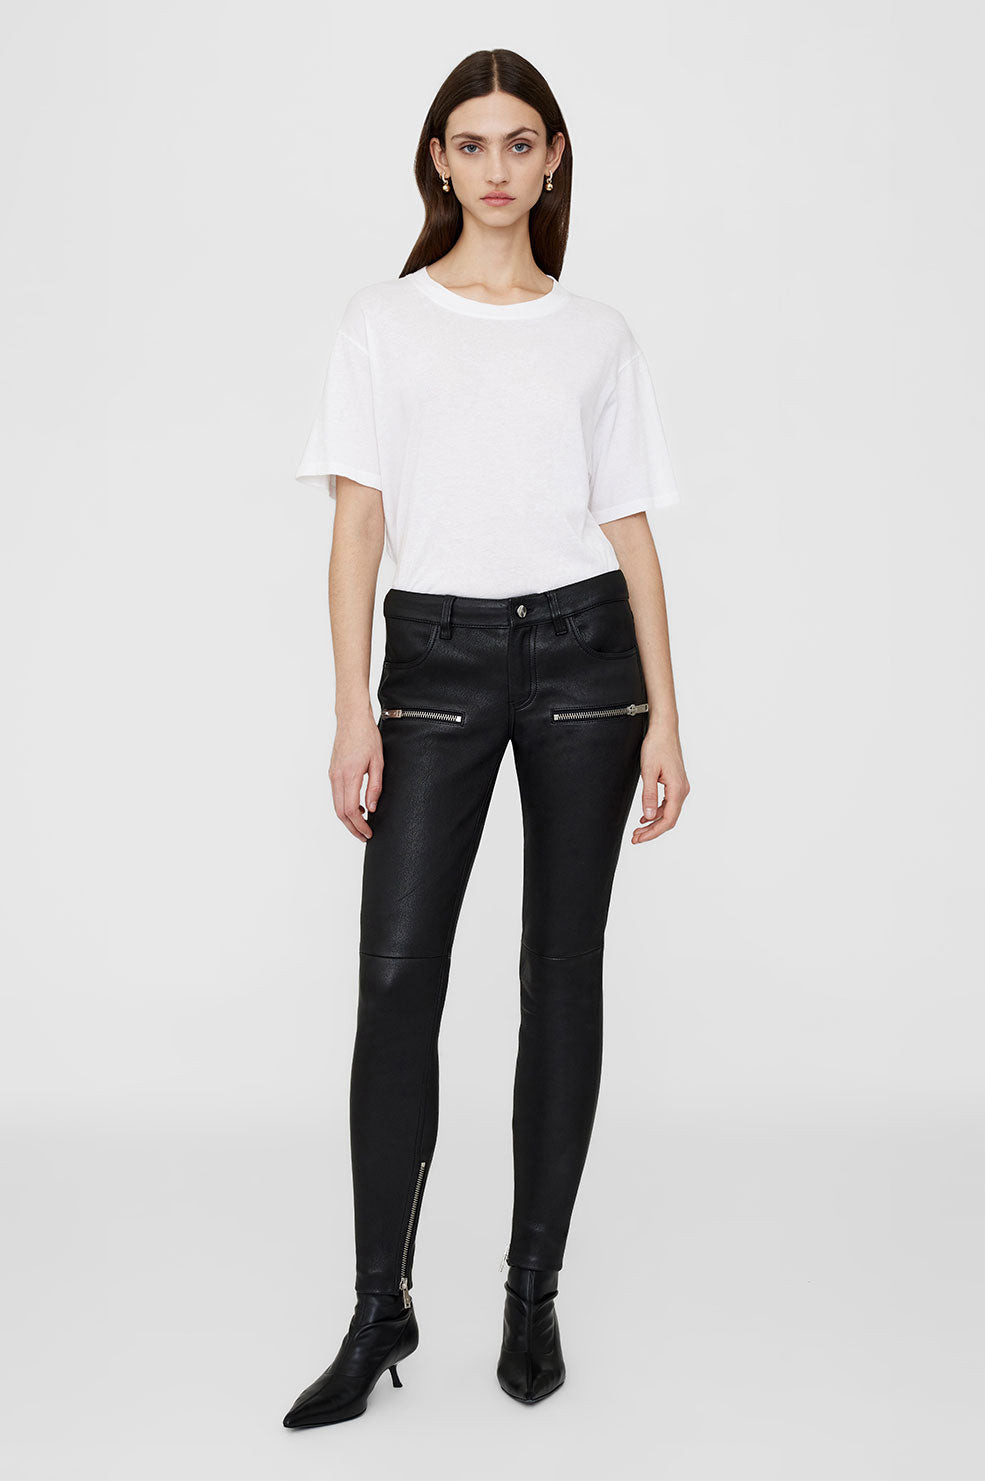 ANINE BING Remy Pant in Black